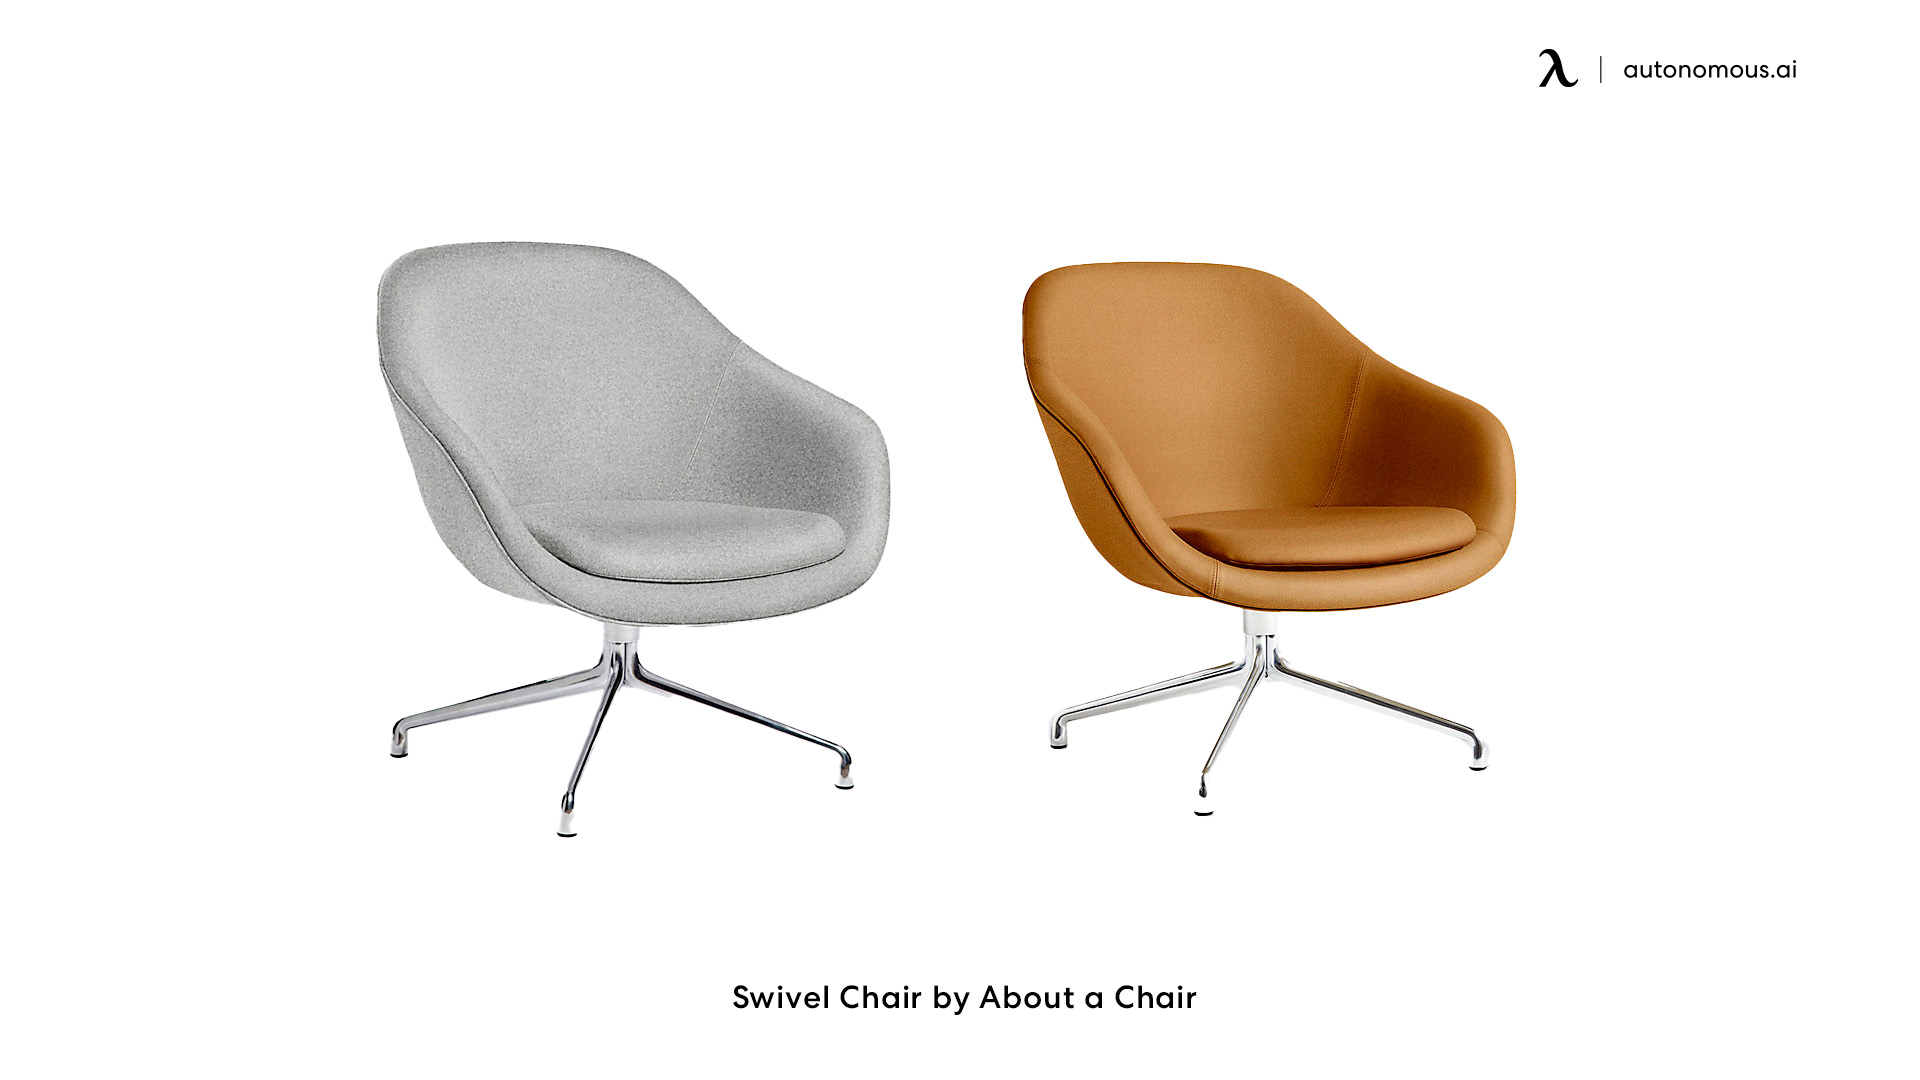 Swivel Chair by About a Chair